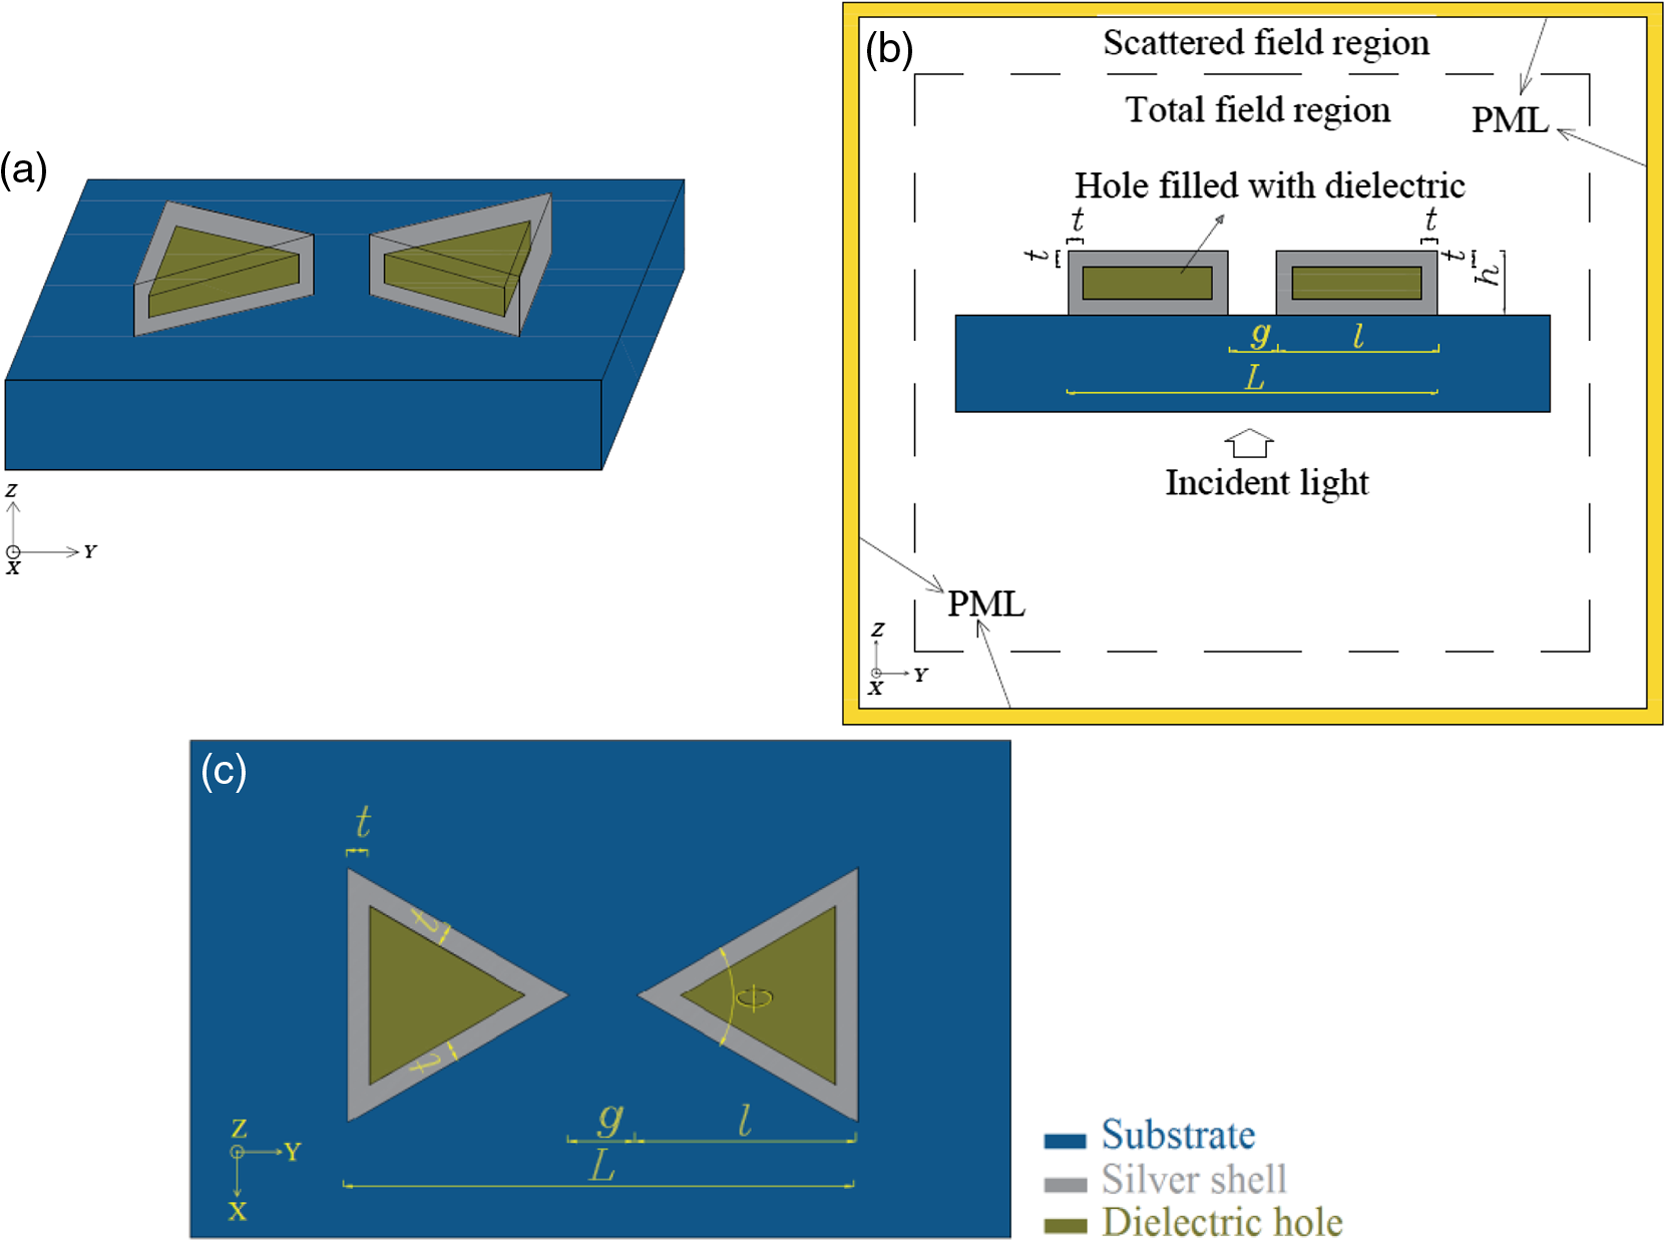 Potential Applications Of Nanoshell Bow Tie Antennas For Biological Imaging And Hyperthermia Therapy